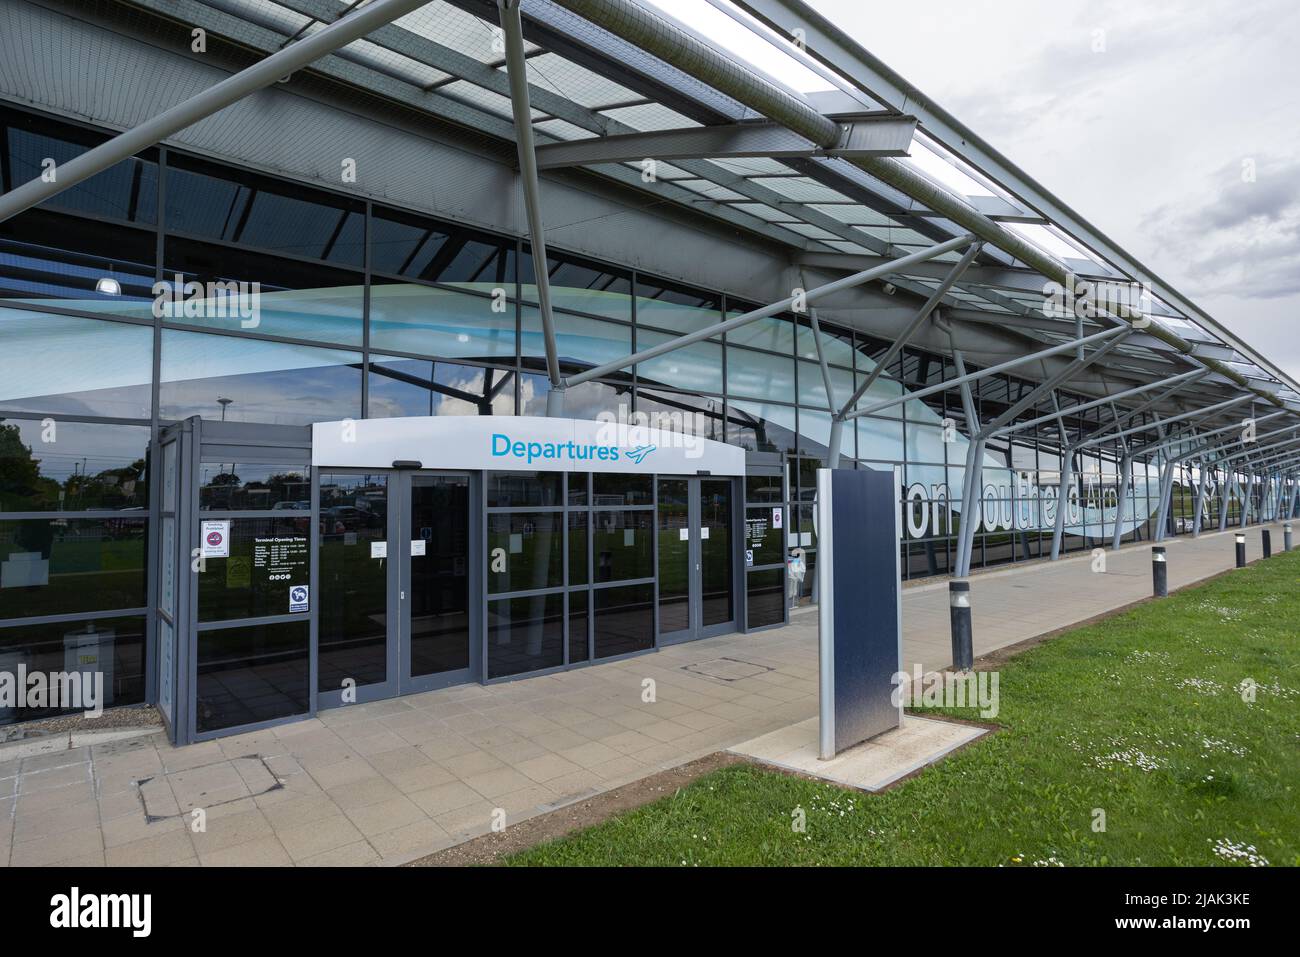 Departures glass door at London Southend Airport (SEN) terminal in the UK Stock Photo